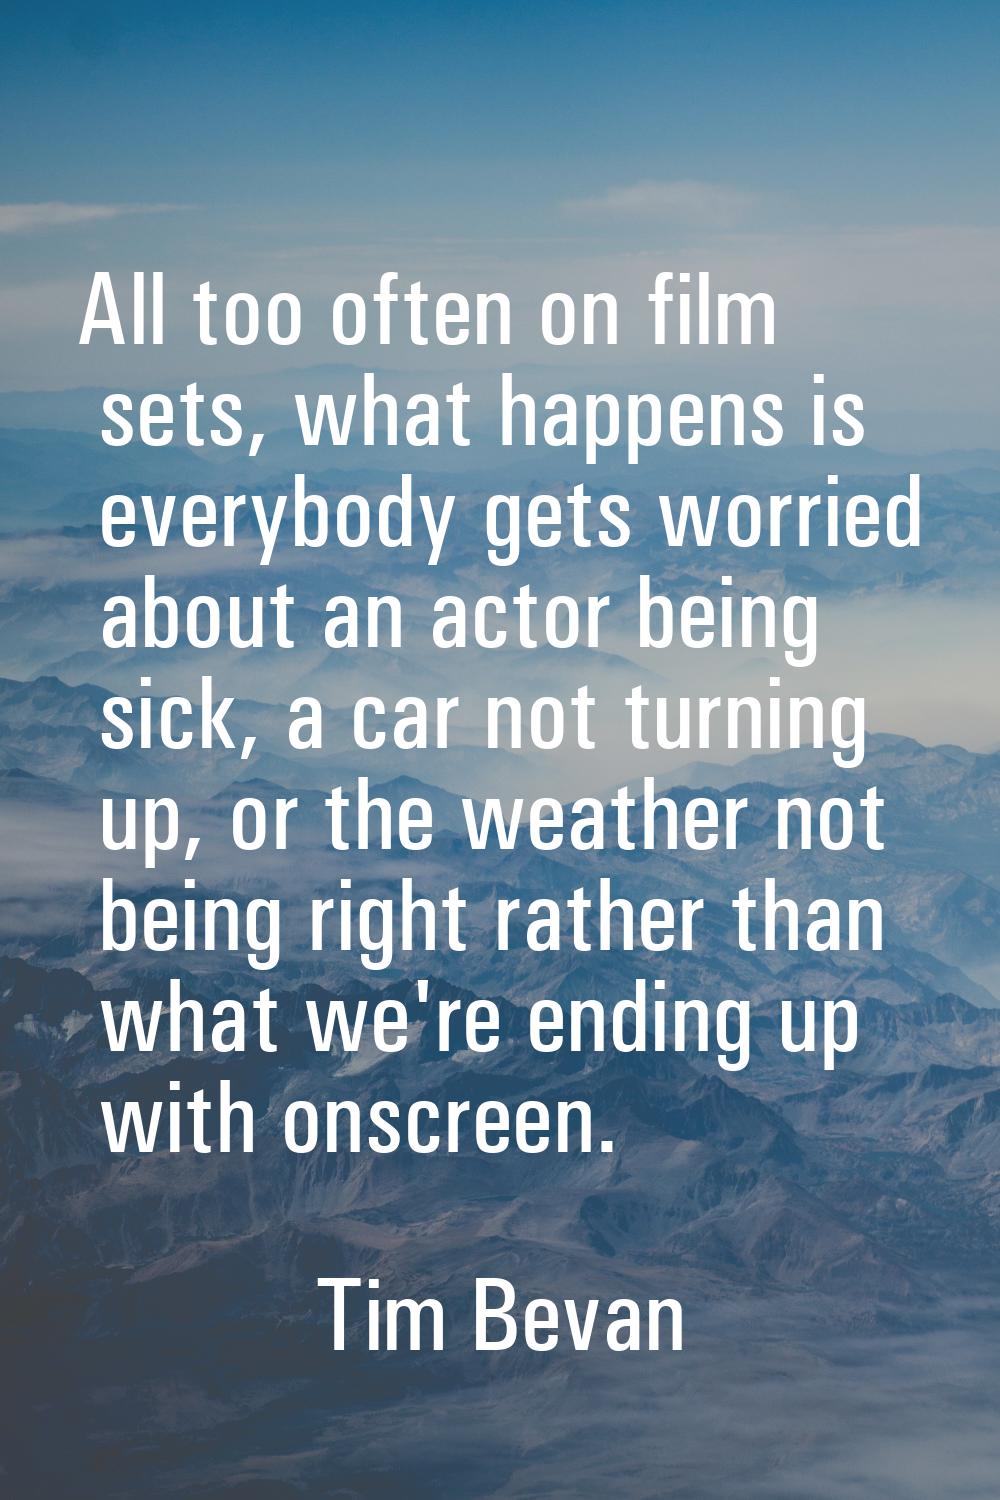 All too often on film sets, what happens is everybody gets worried about an actor being sick, a car